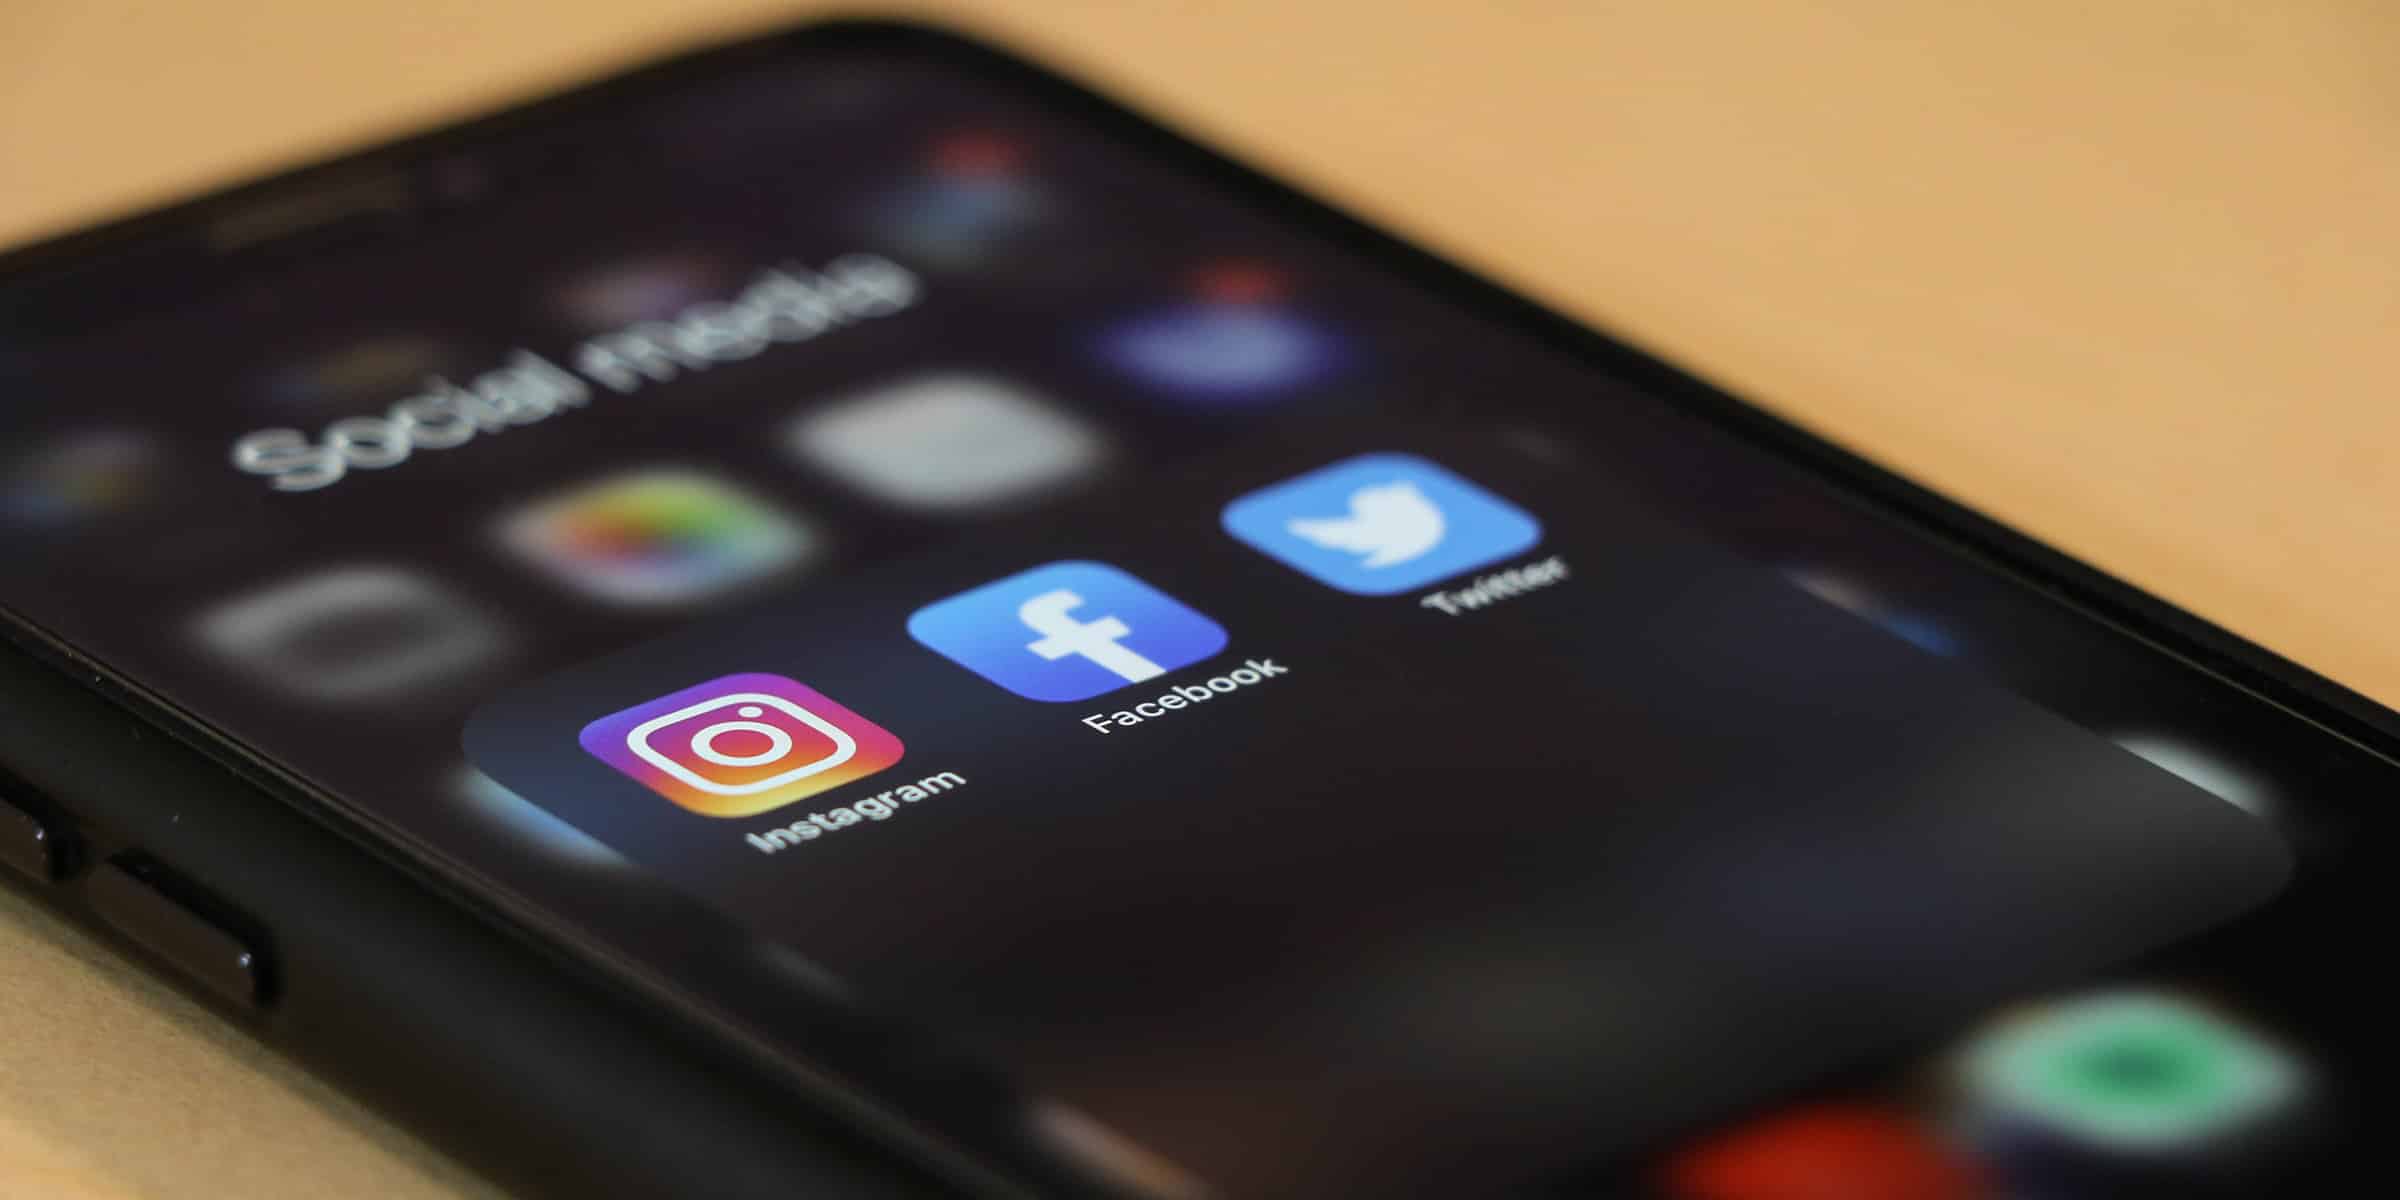 ‘Anything You Post Can And Will Be Used Against You In A Court of Law’, And Other Social Media Legal Tips